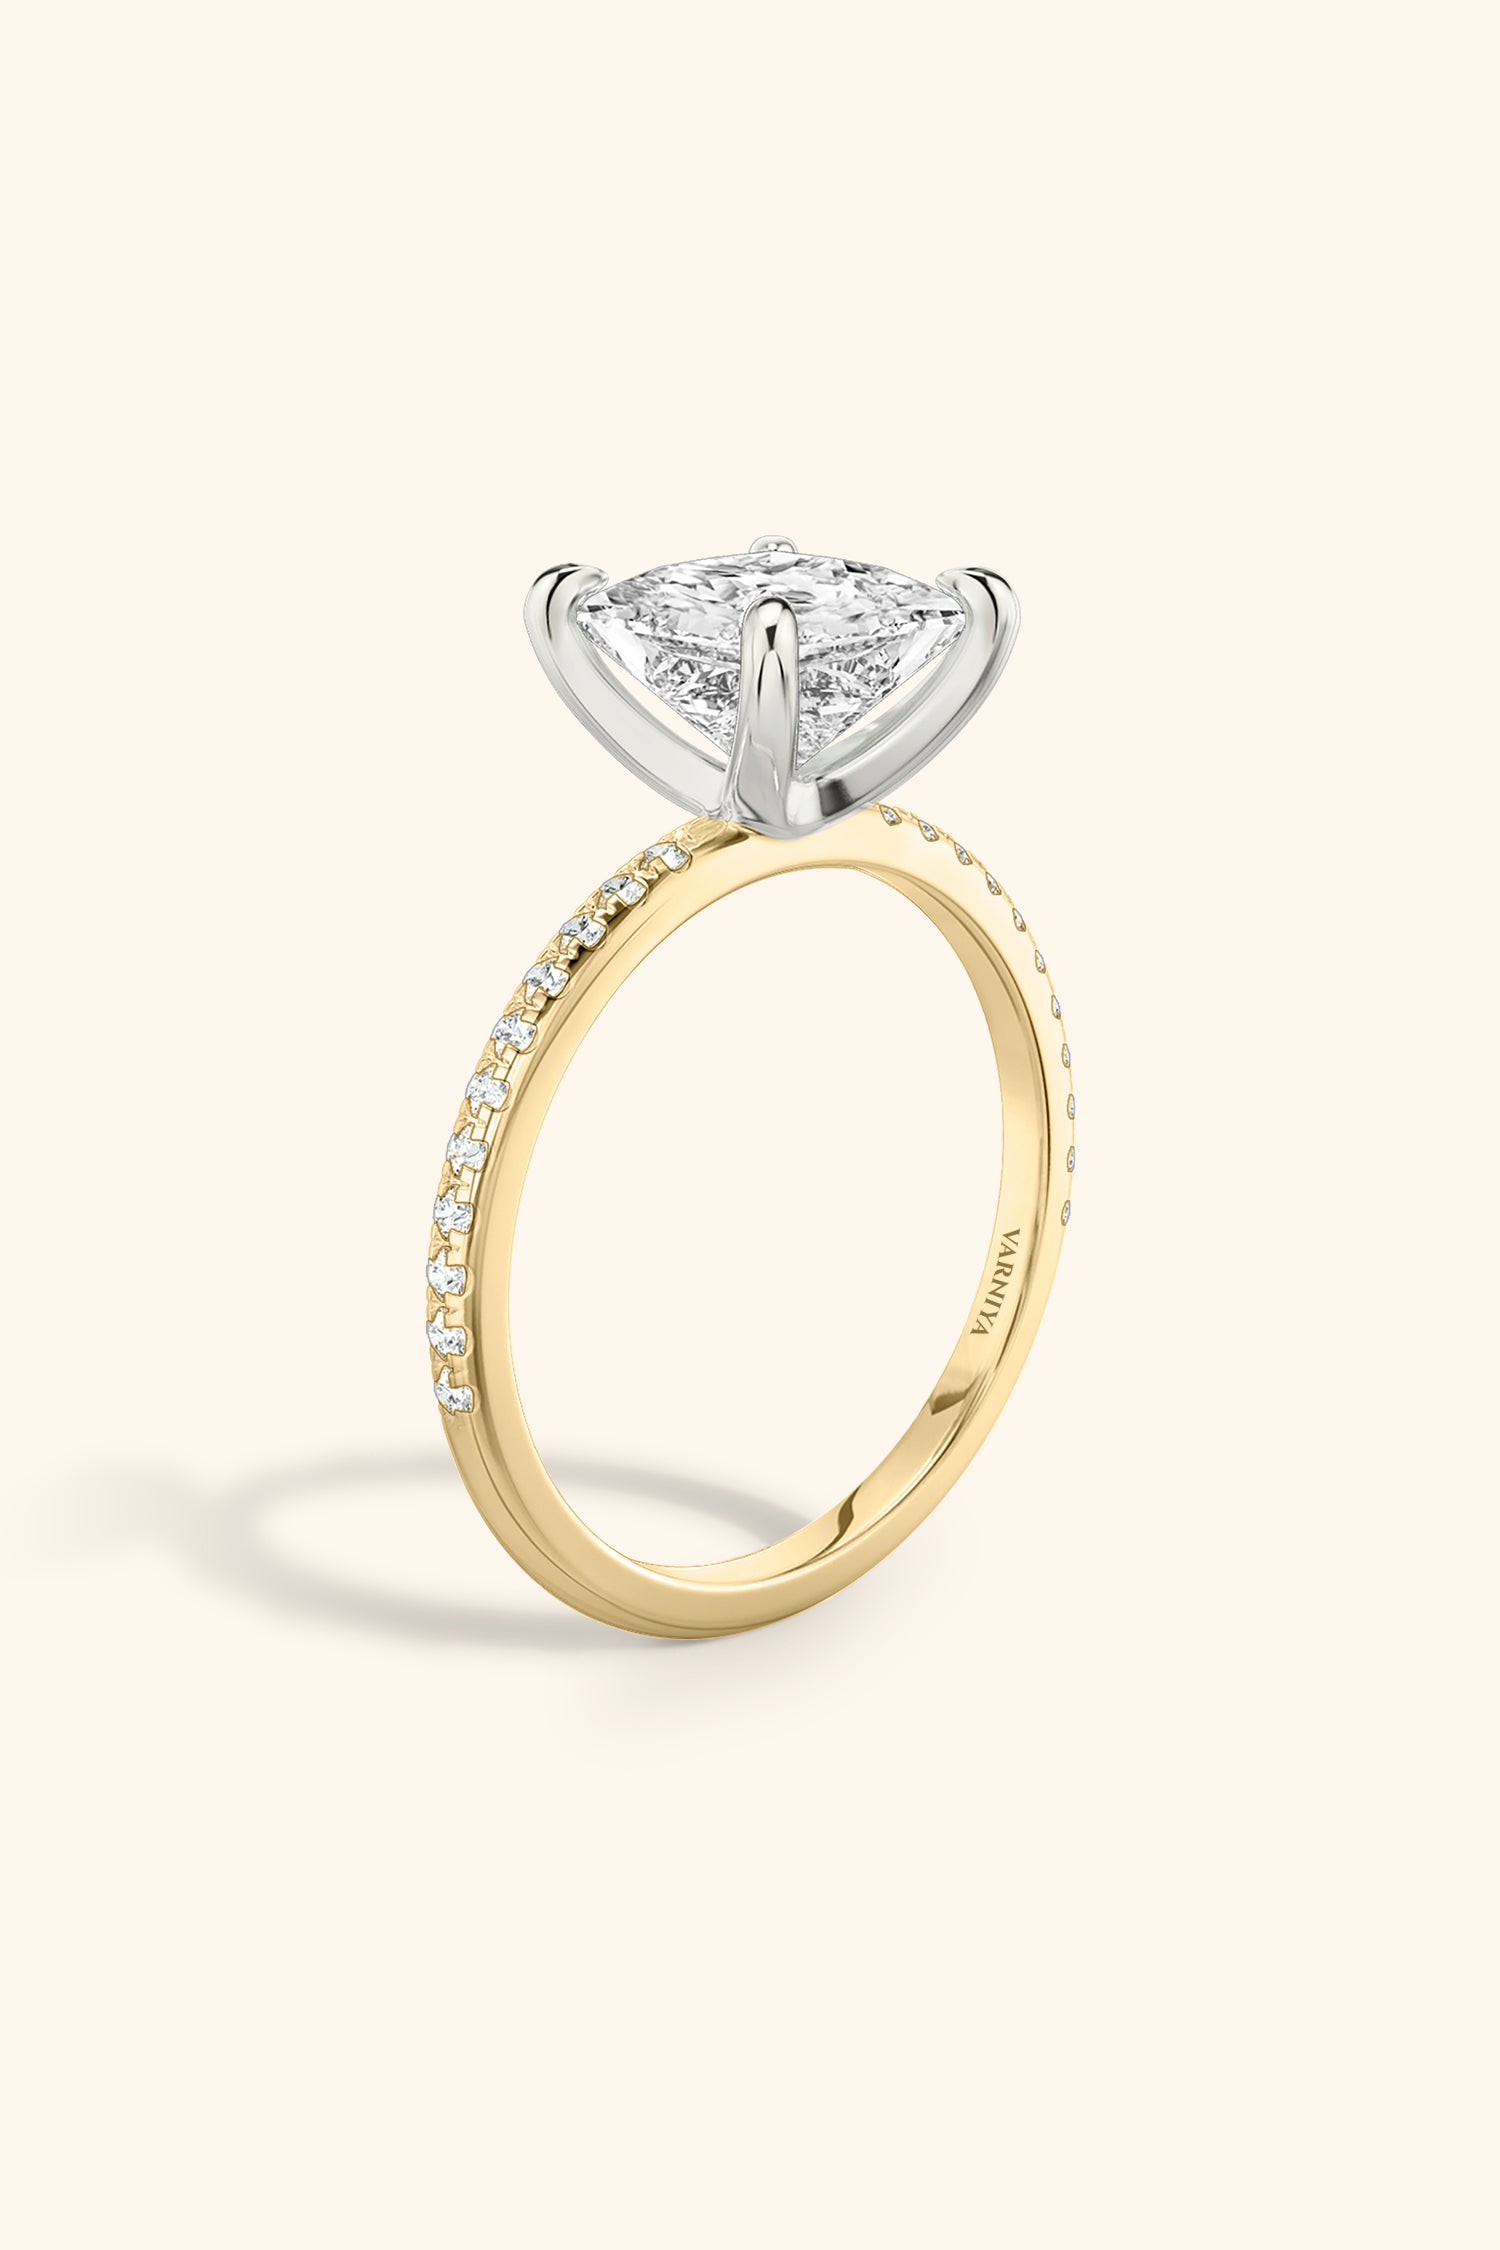 Dual Tone Glance Pavé Ring with 1 Carat Princess Solitaire